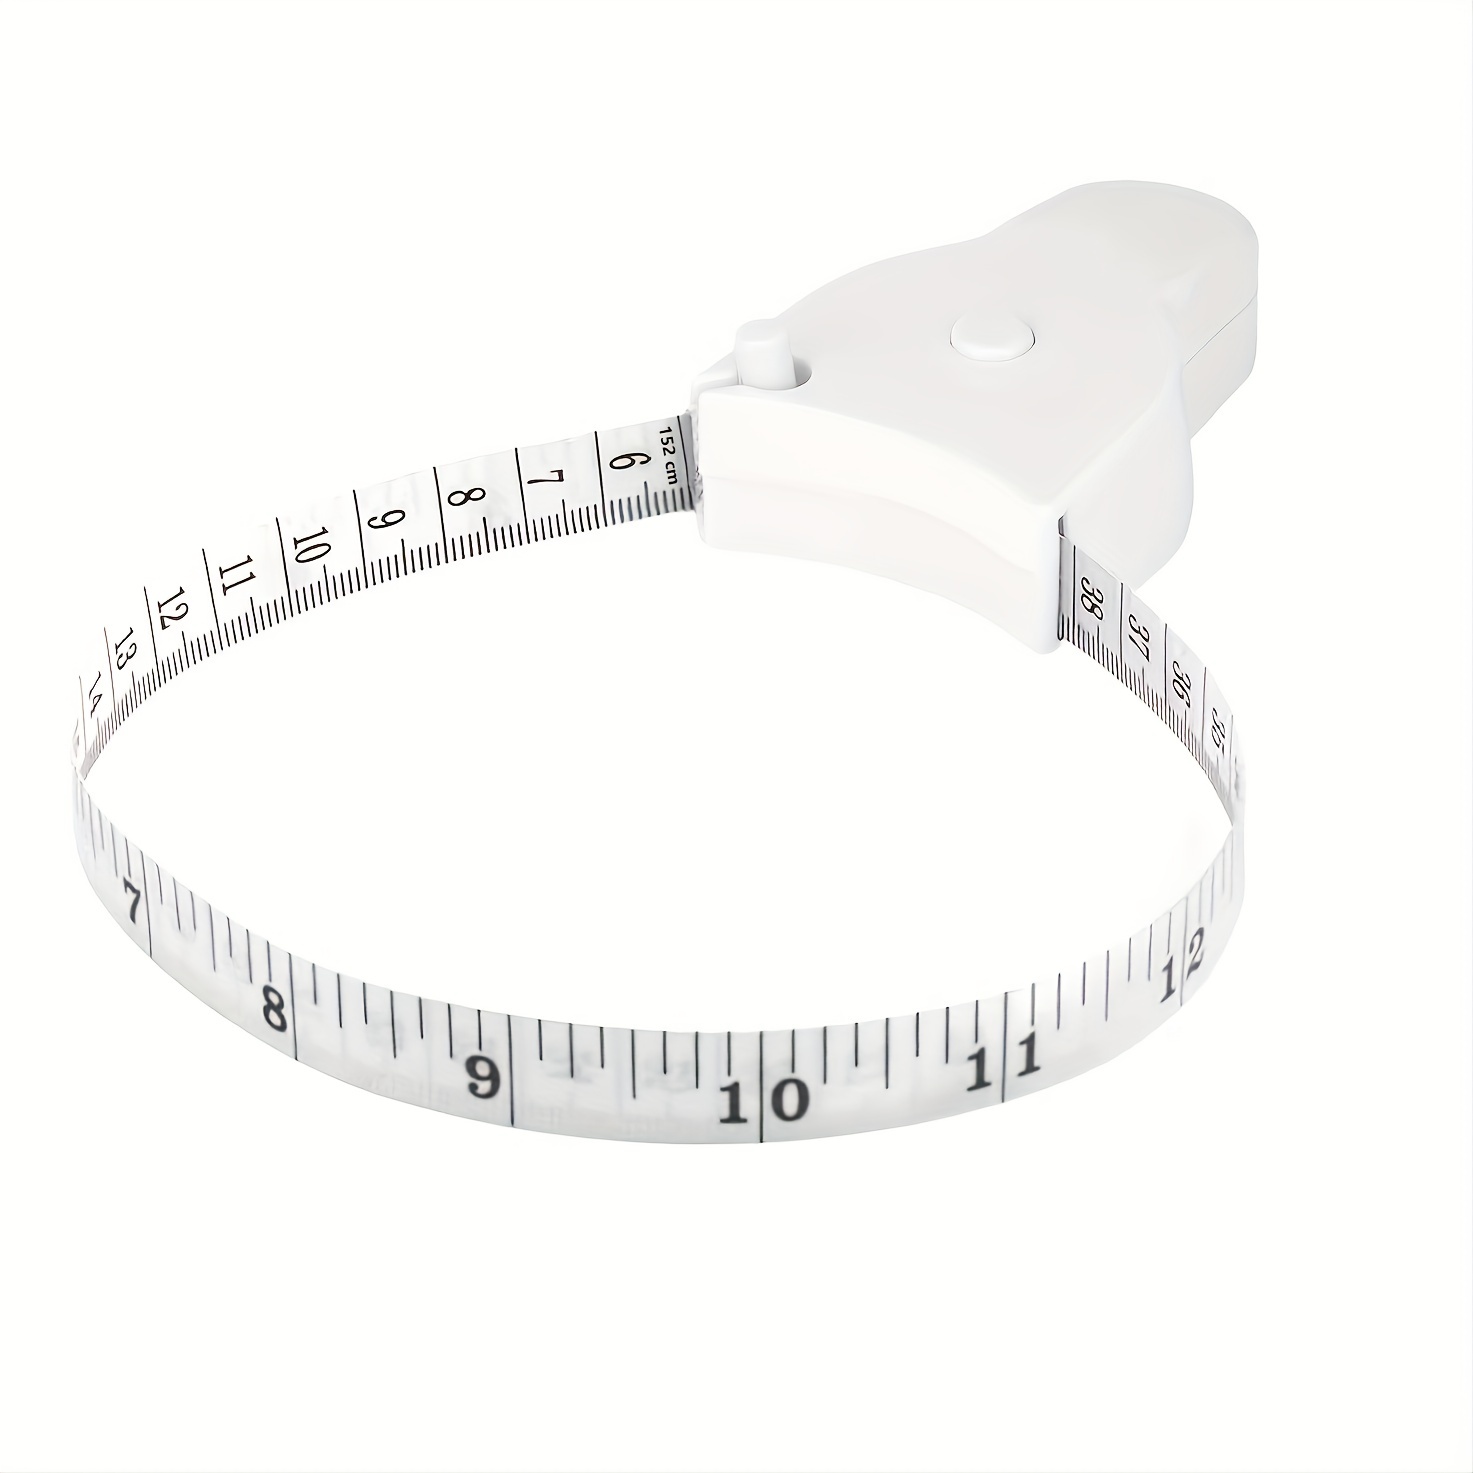 Measuring Tape For Body, 150cm/60inch Soft Retractable Tape